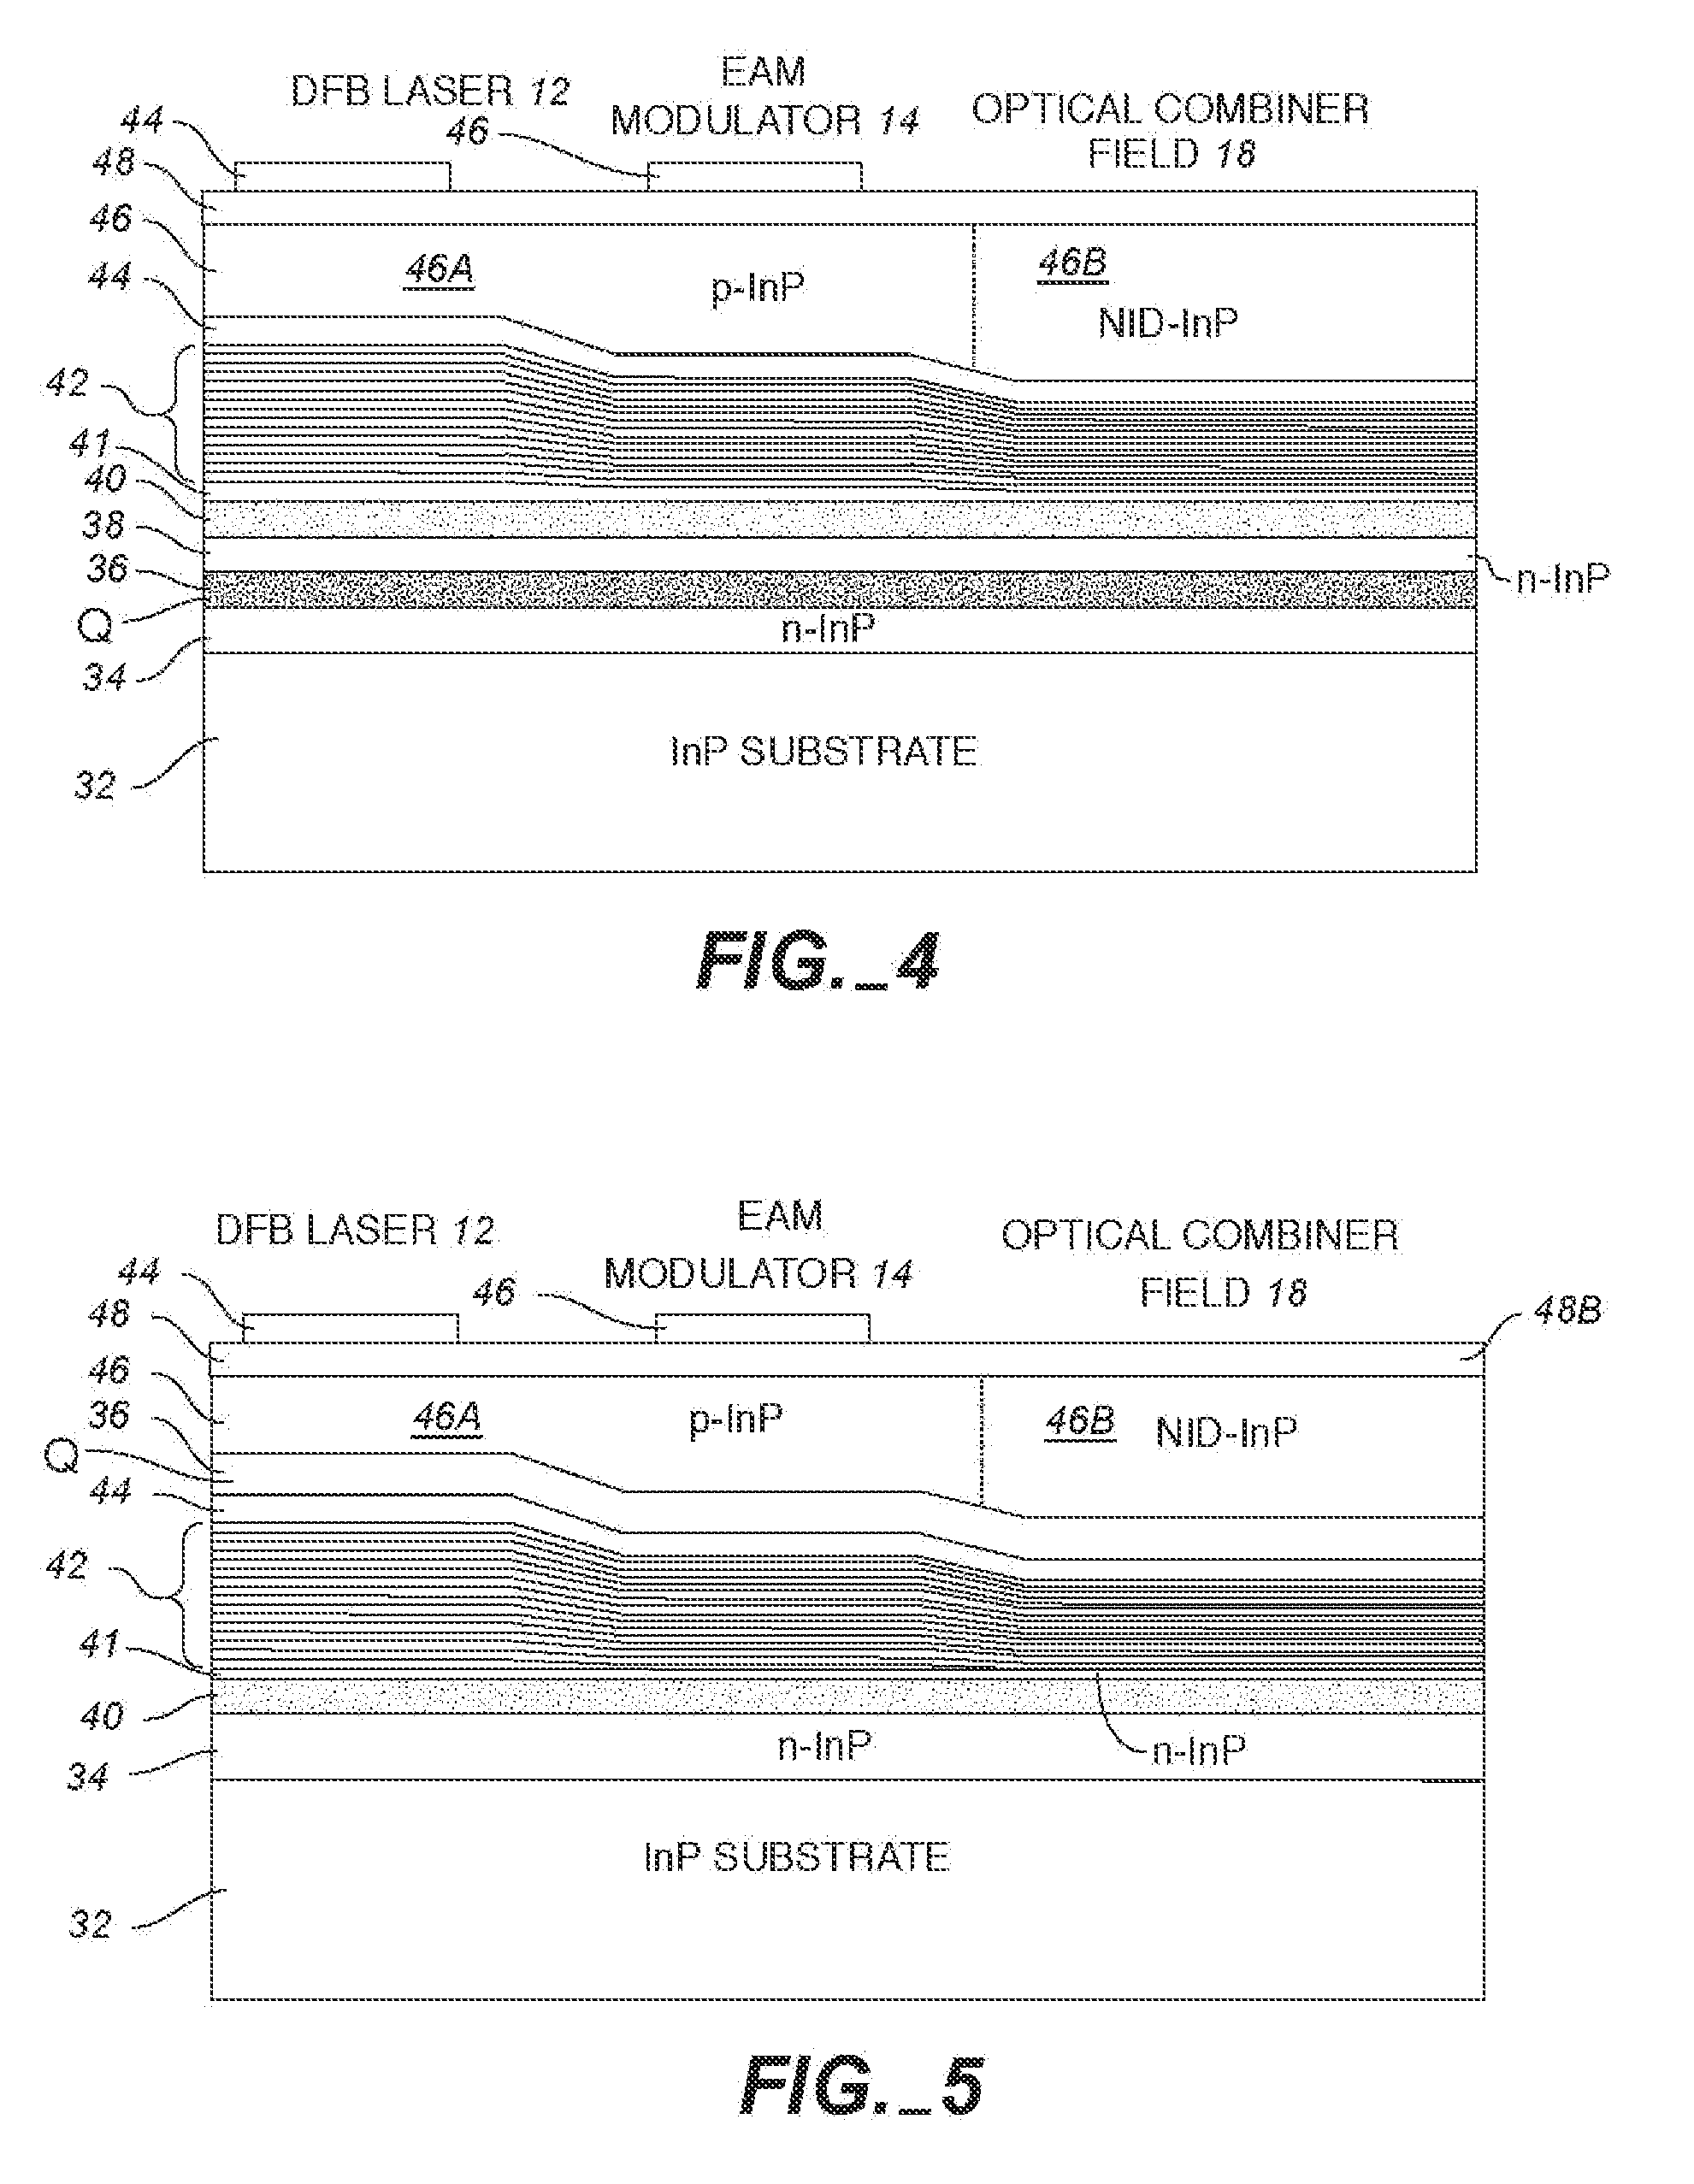 Monolithic transmitter photonic integrated circuit (TXPIC) having tunable modulated sources with feedback system for source power level or wavelength tuning